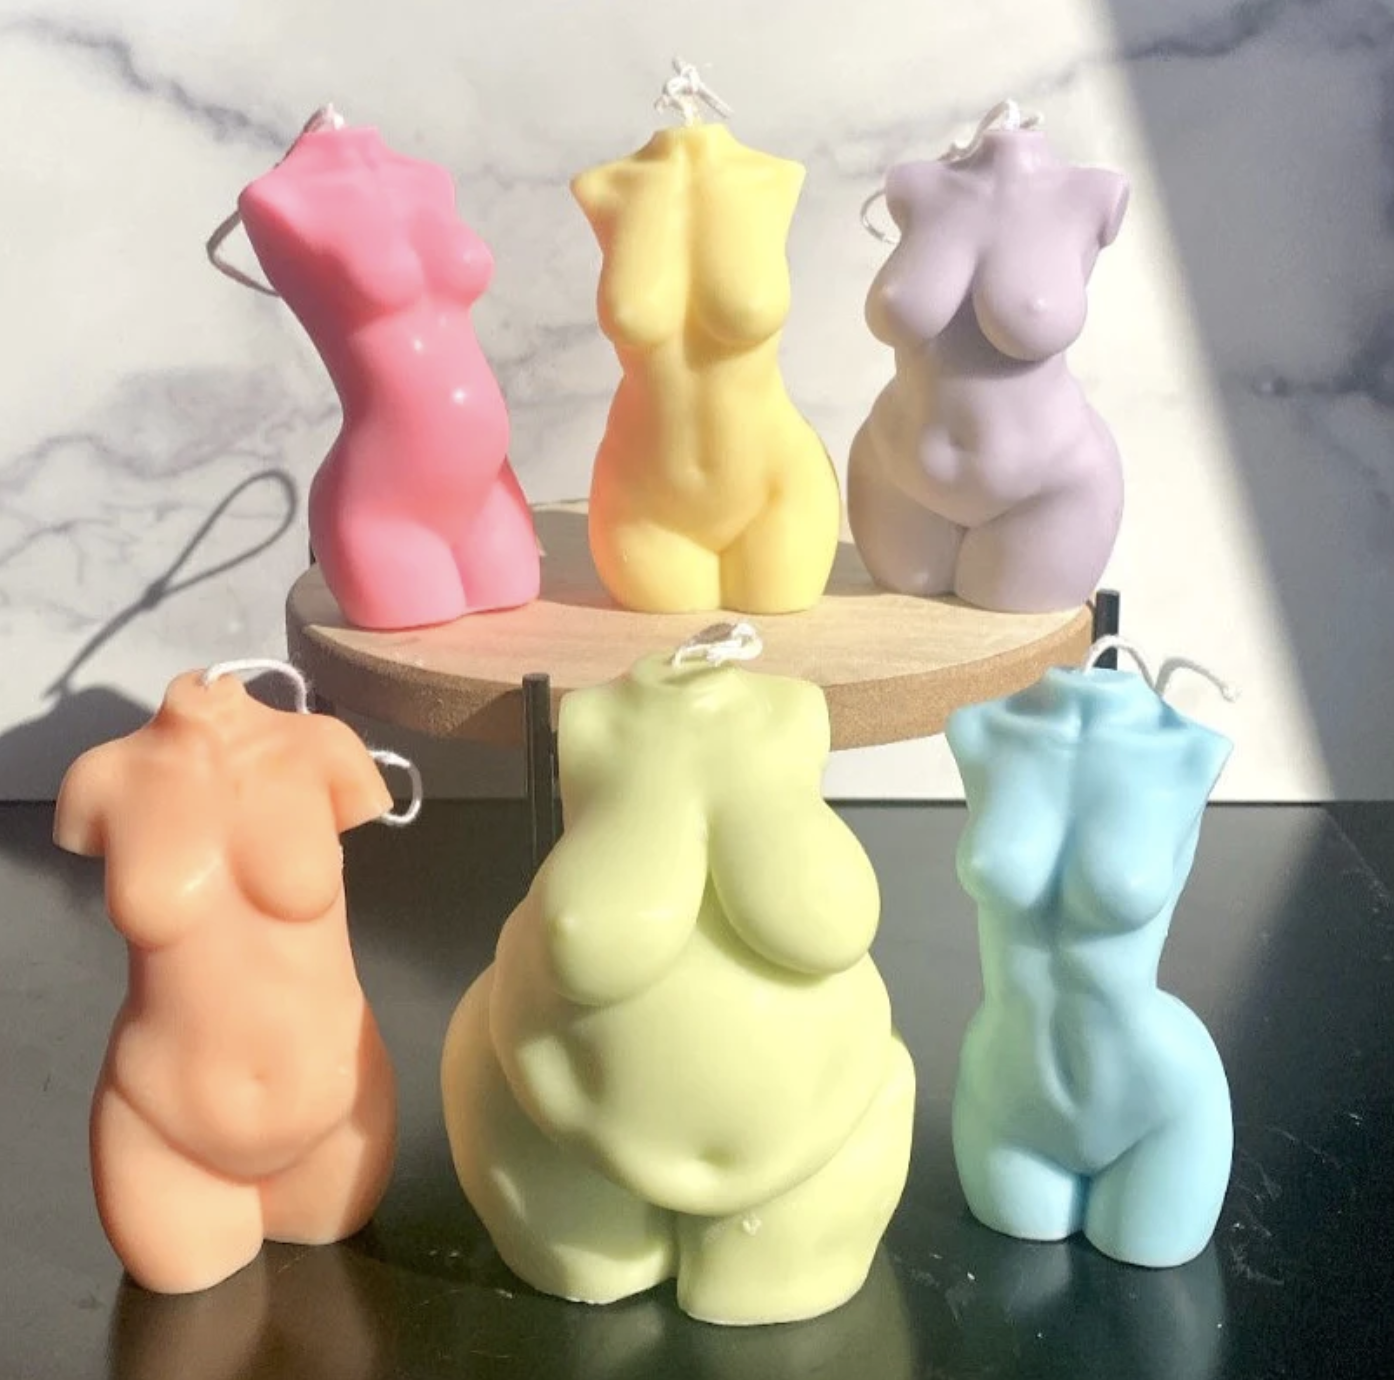 female body forms in various sizes candles in a range of colors